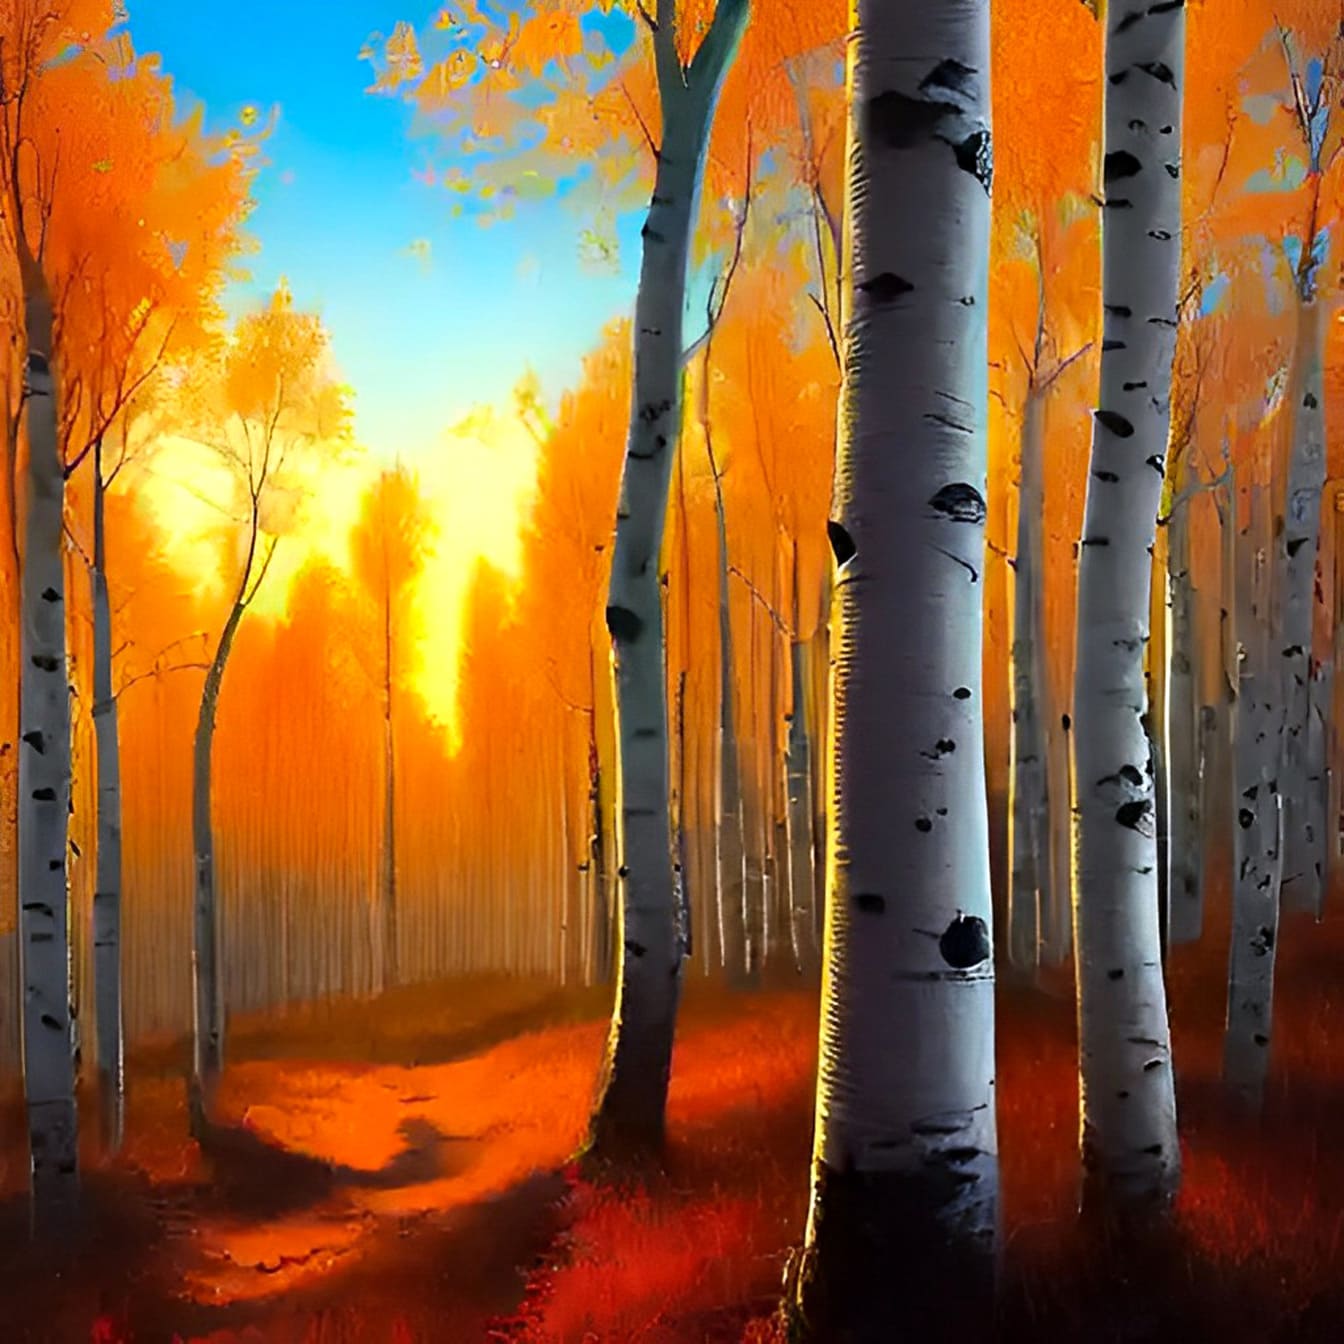 Illustration of birch trees in a forest at sunset